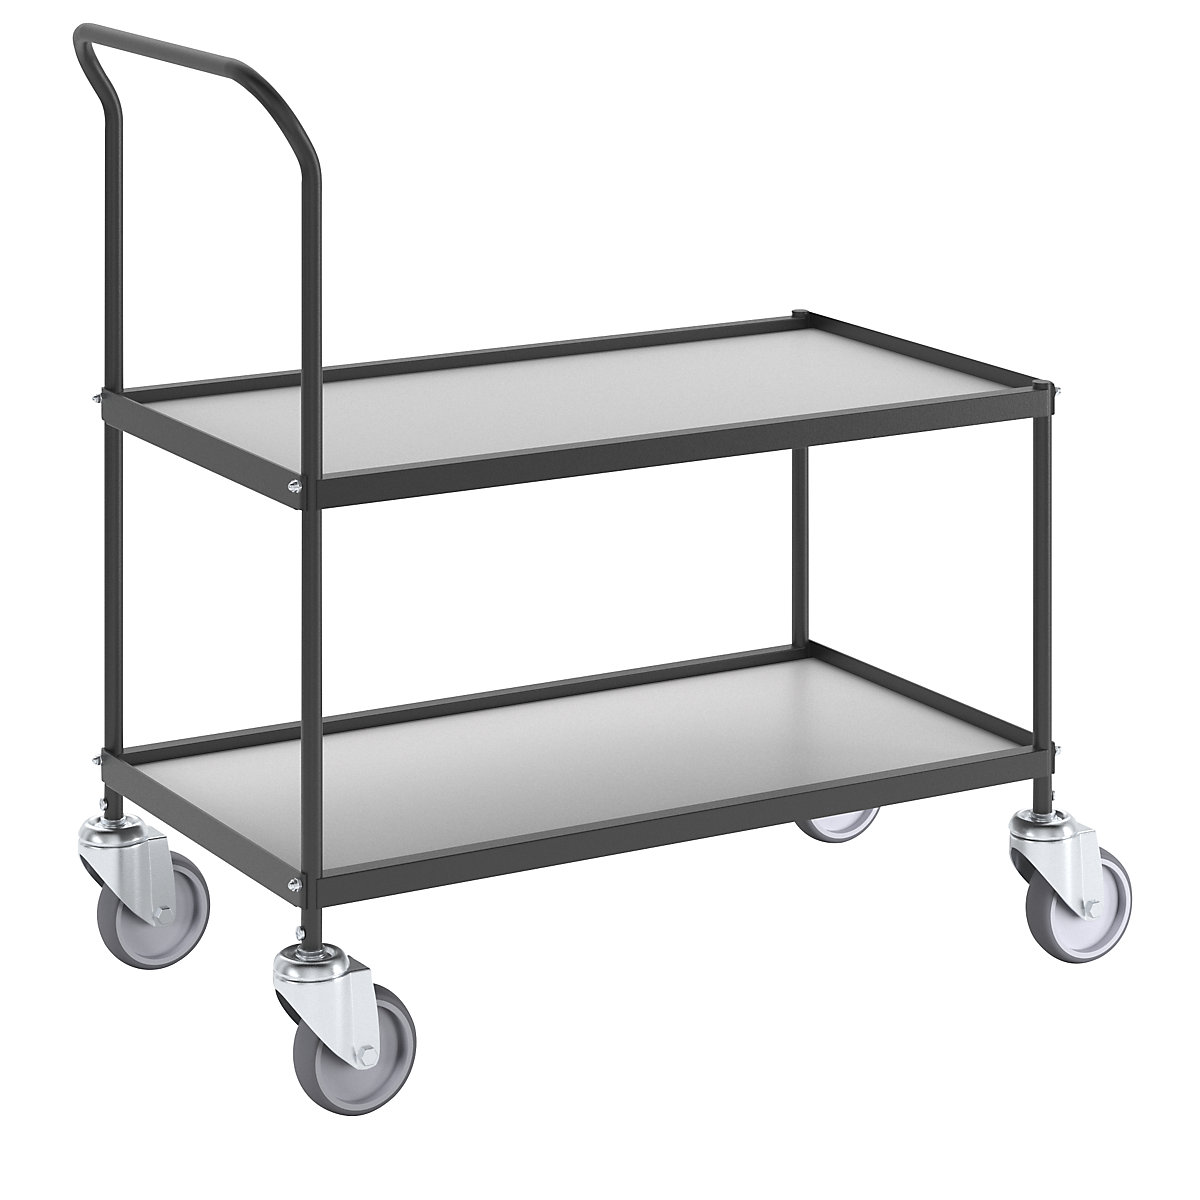 Serving and clearing trolley, 2 shelves, LxWxH 840 x 470 x 960 mm-3